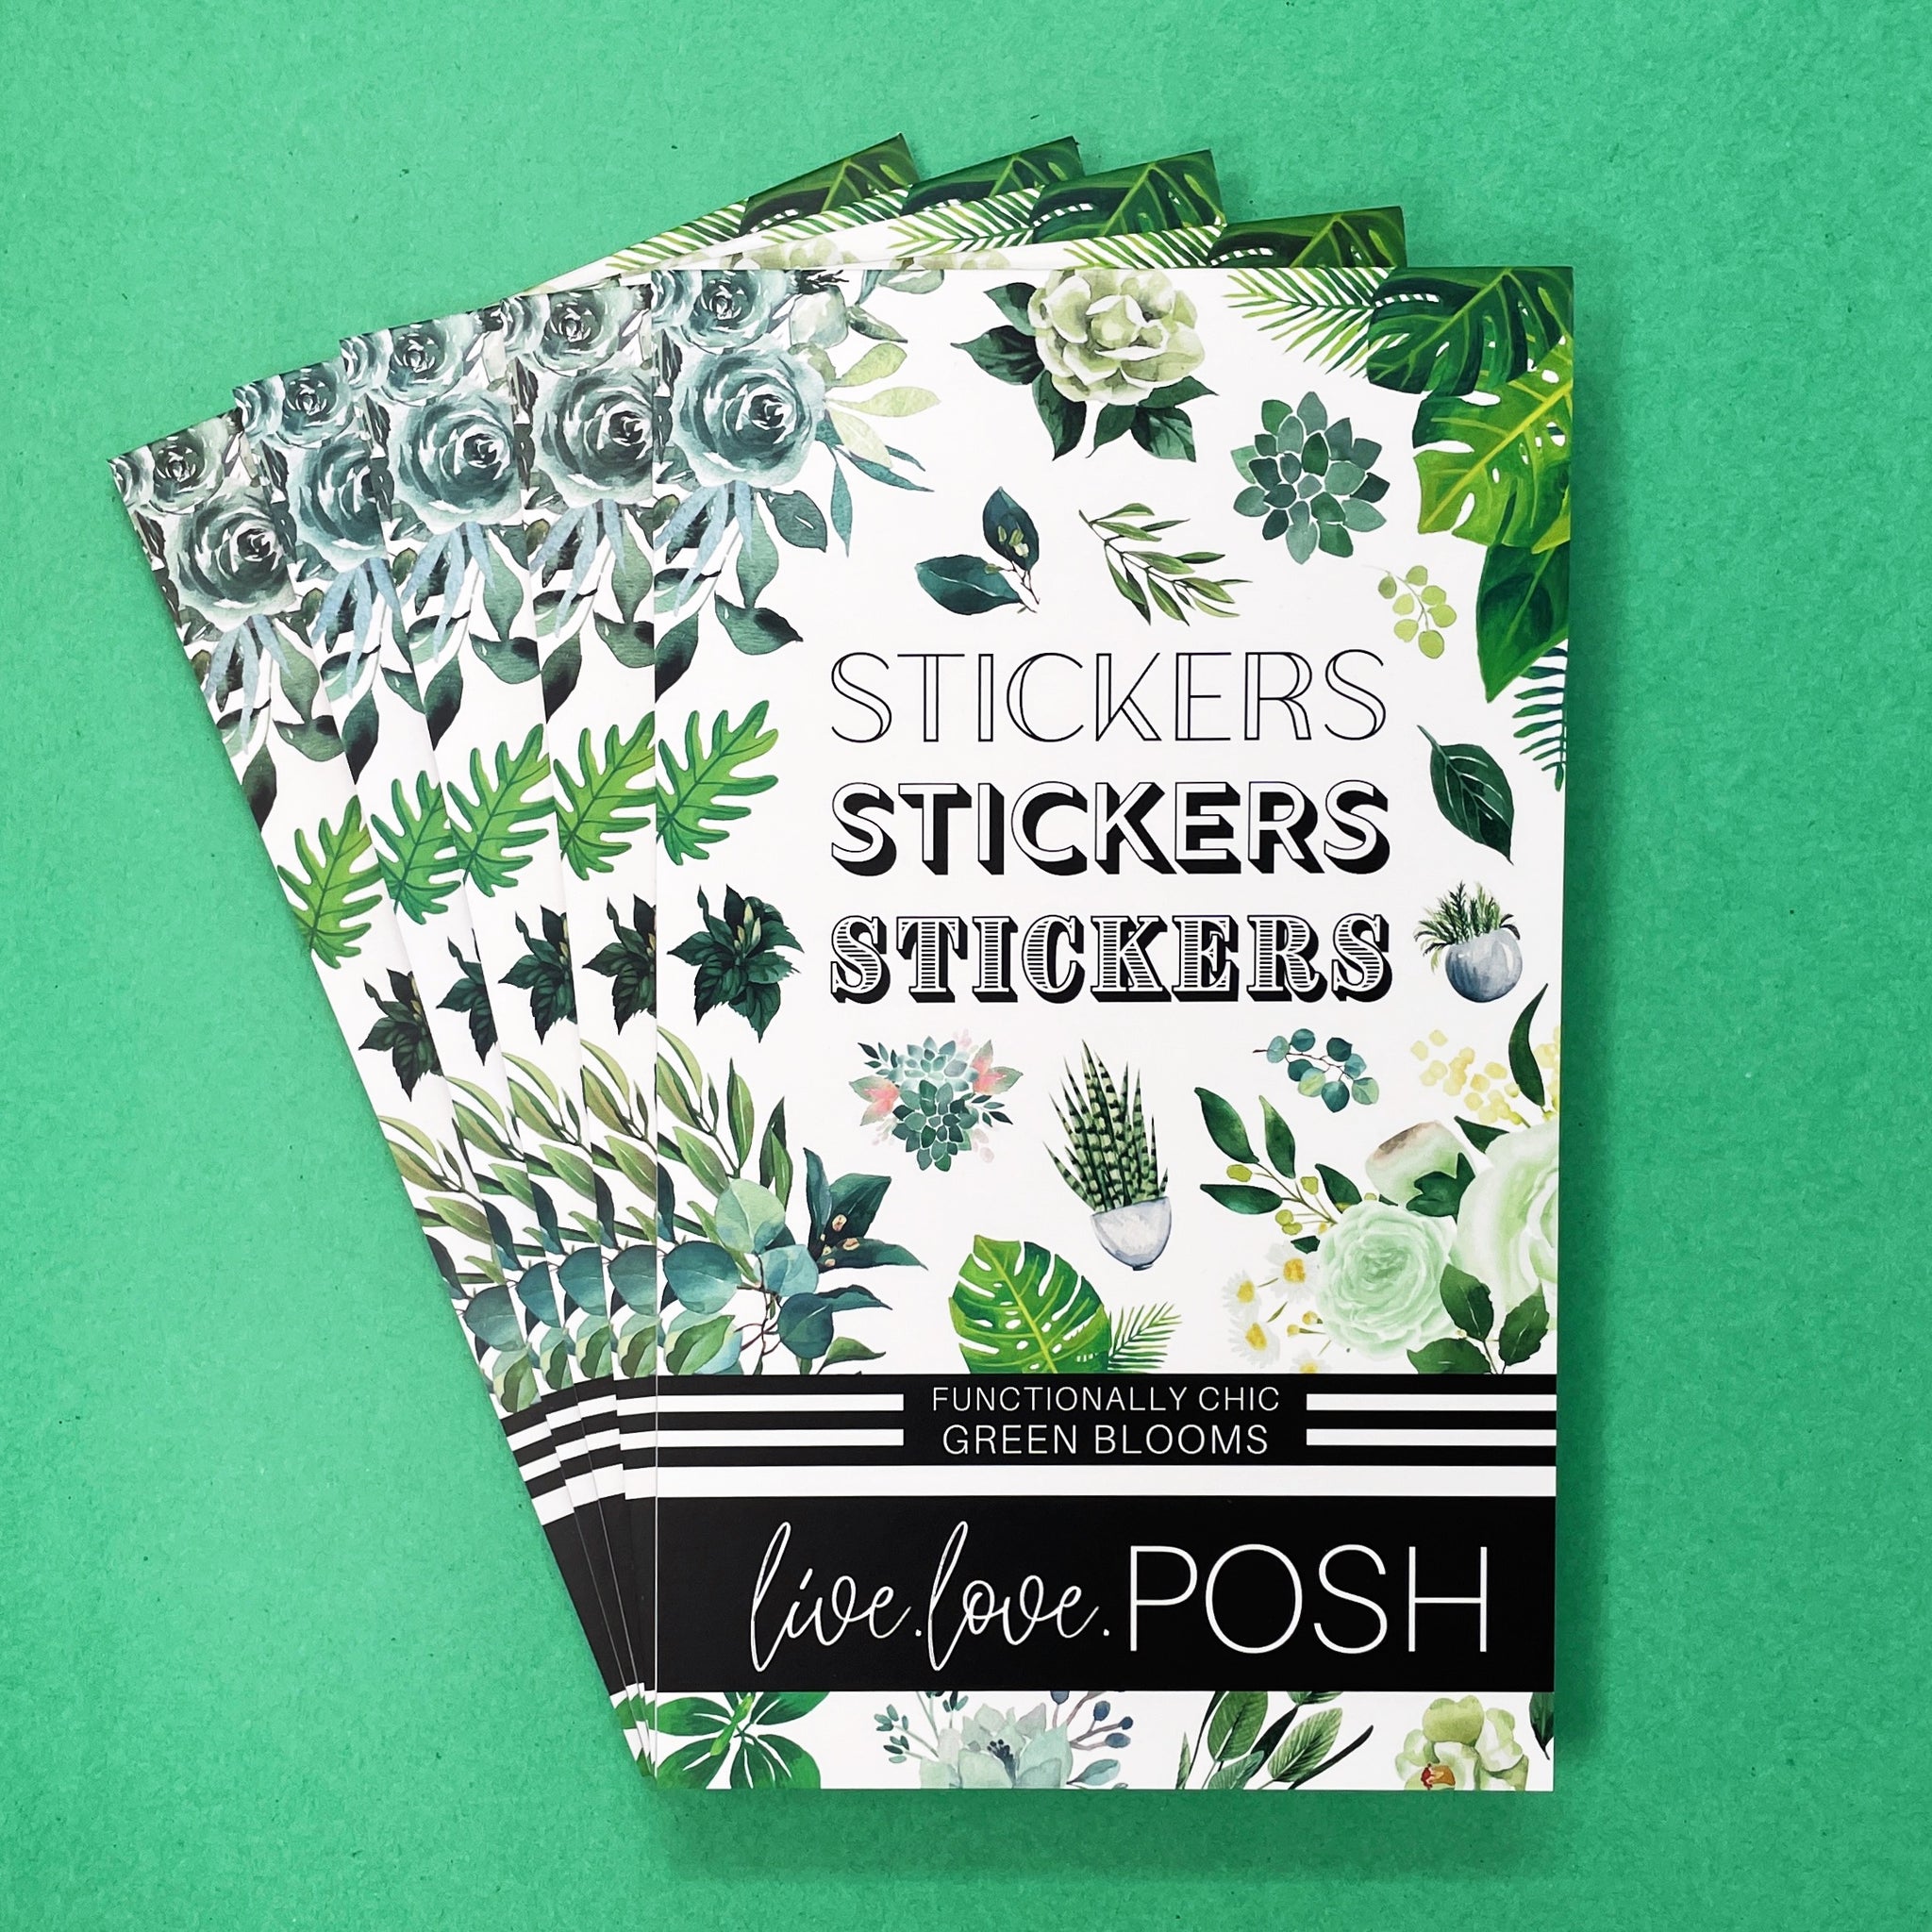 GREEN BLOOMS FUNCTIONALLY CHIC STICKER BOOK